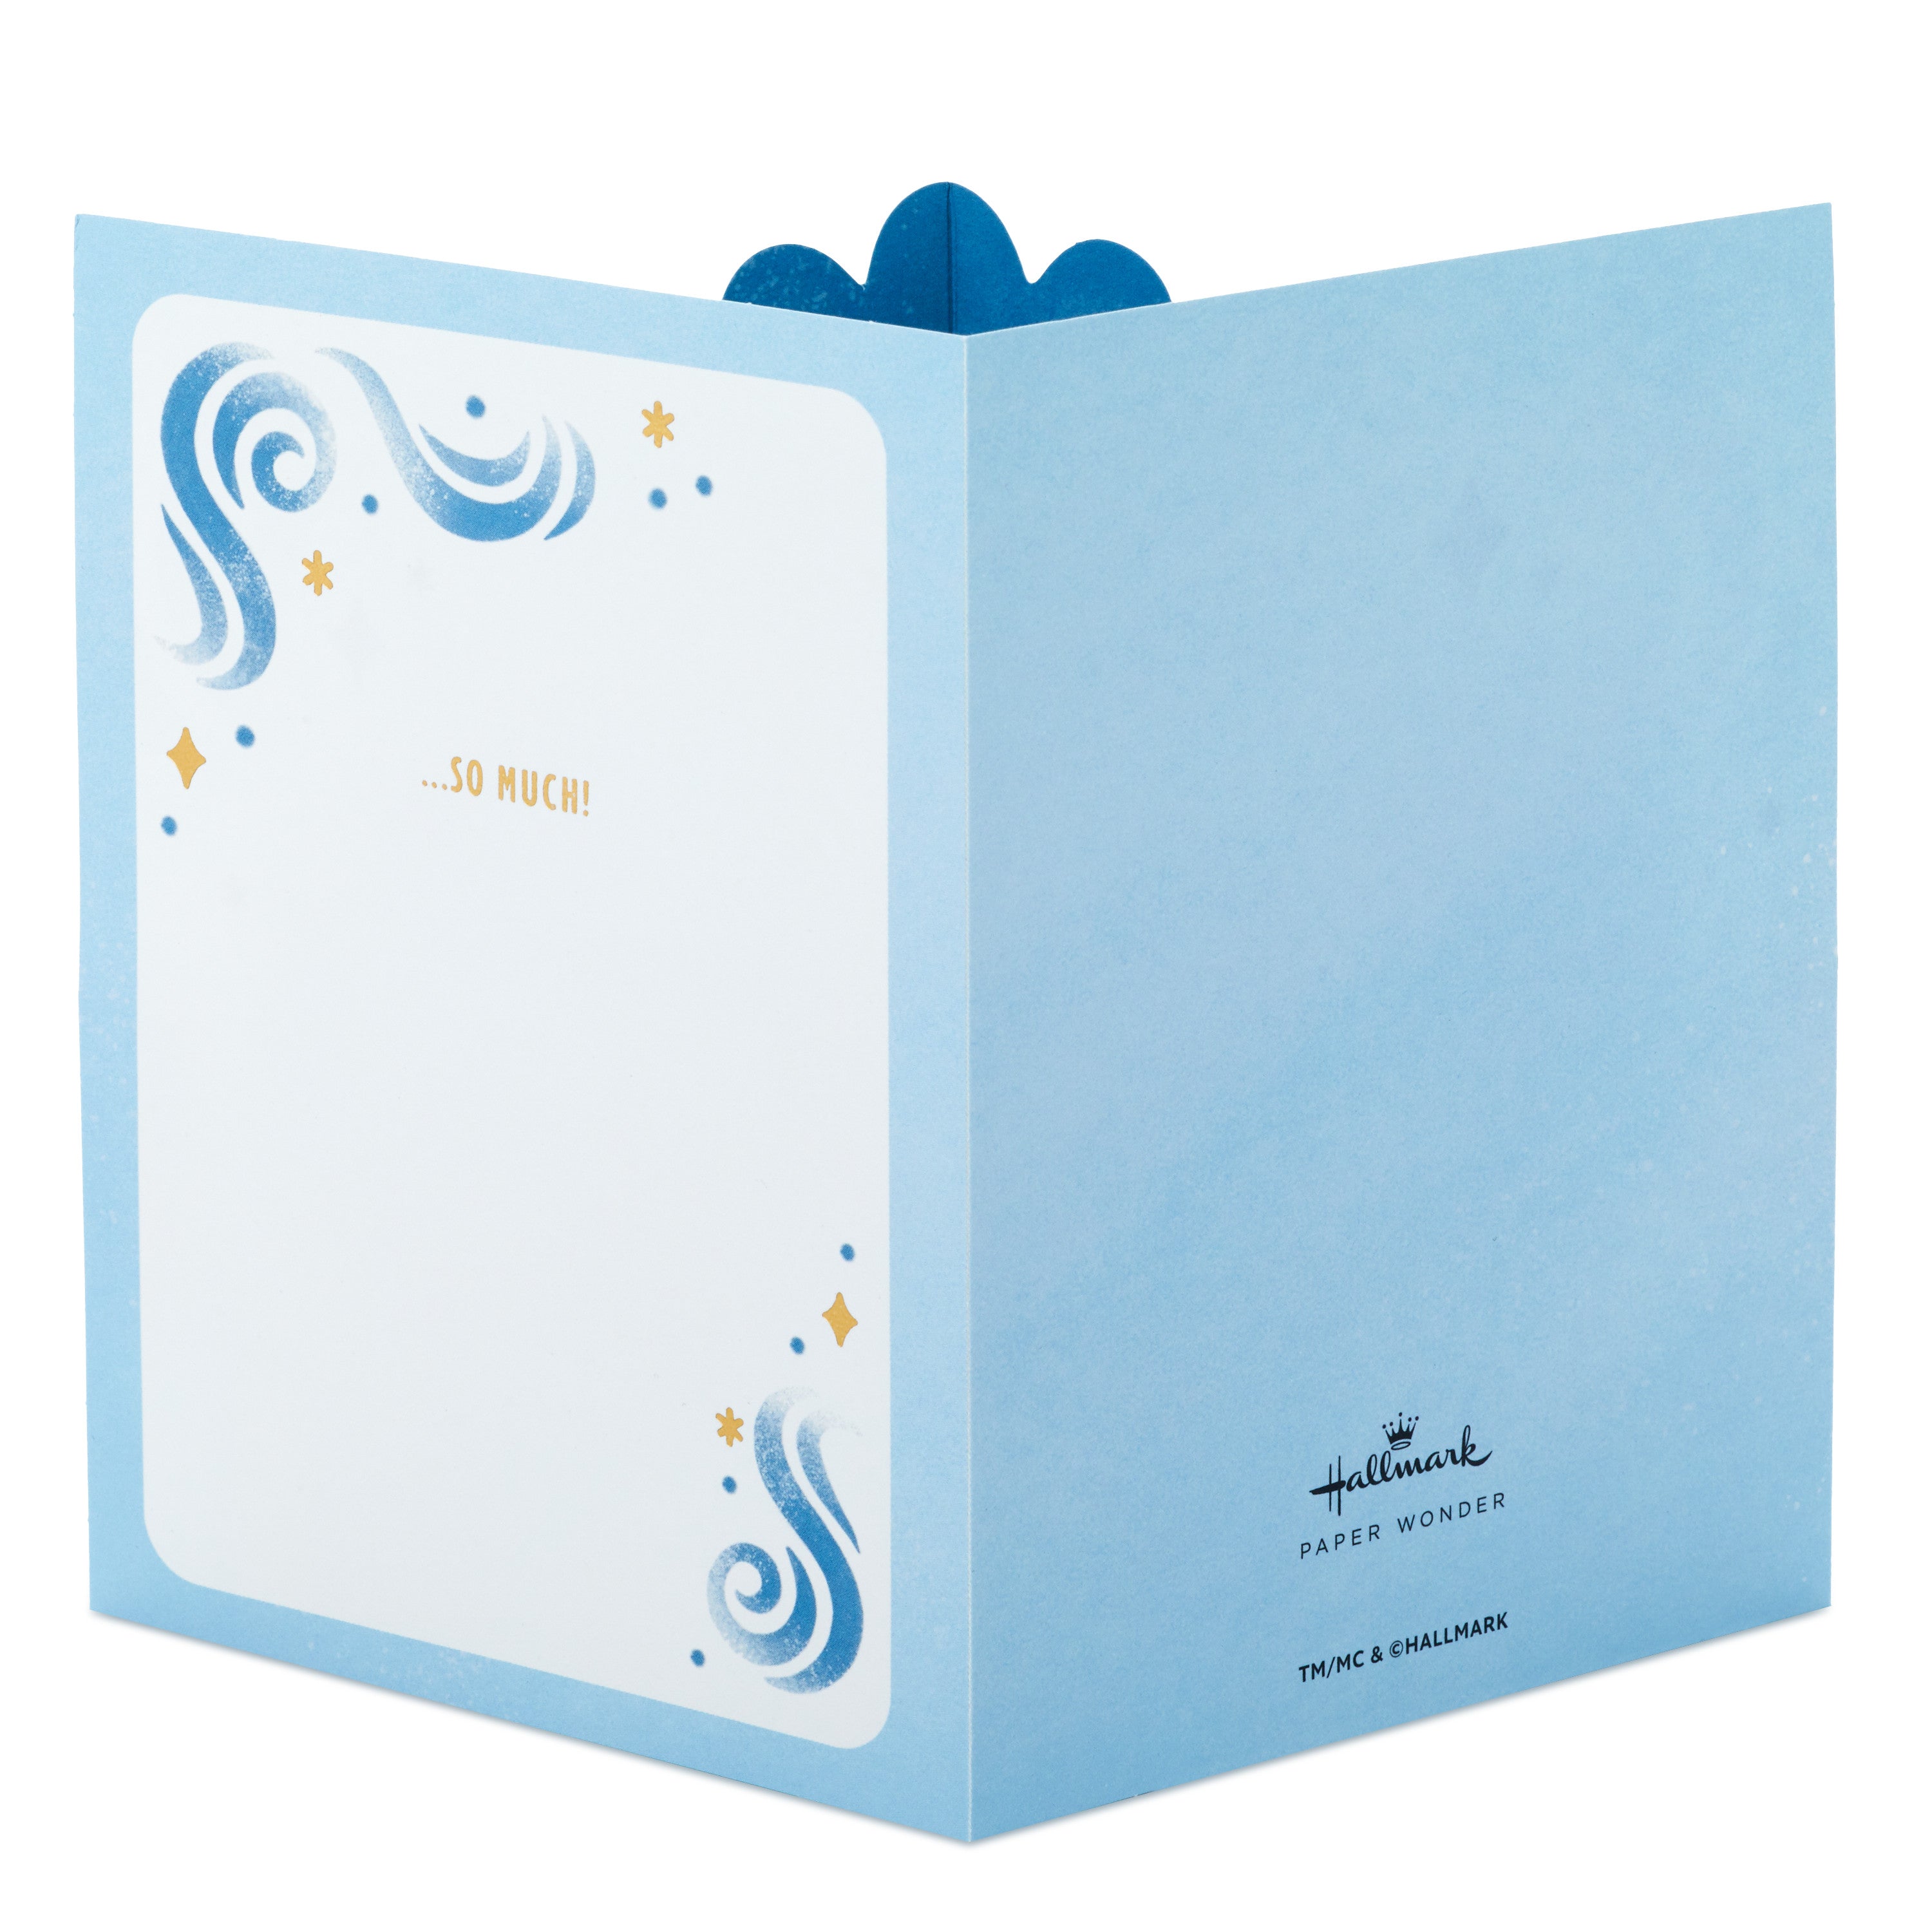 Hallmark Paper Wonder Pop Up Thank You Card, Nurses Day Card, Admin Professional Day Card (Blue and Gold)